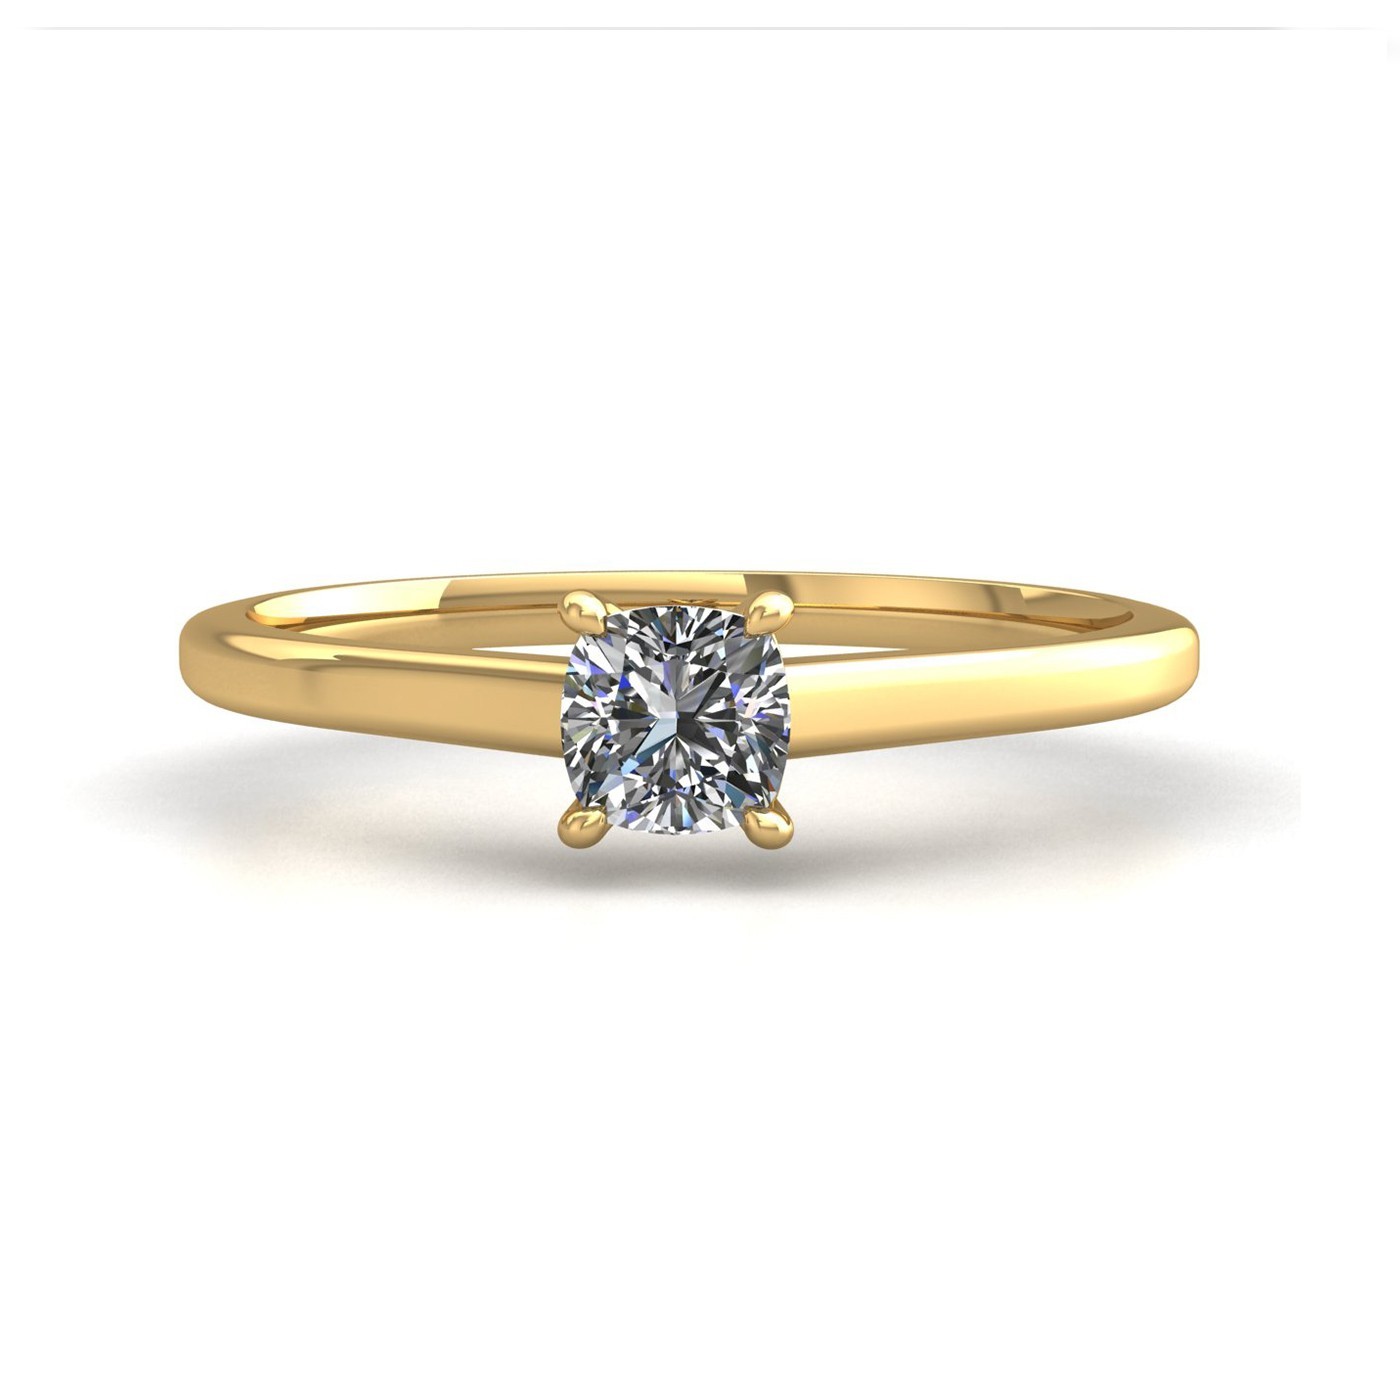 18k yellow gold 1.2ct 4 prongs solitaire cushion cut diamond engagement ring with whisper thin band Photos & images